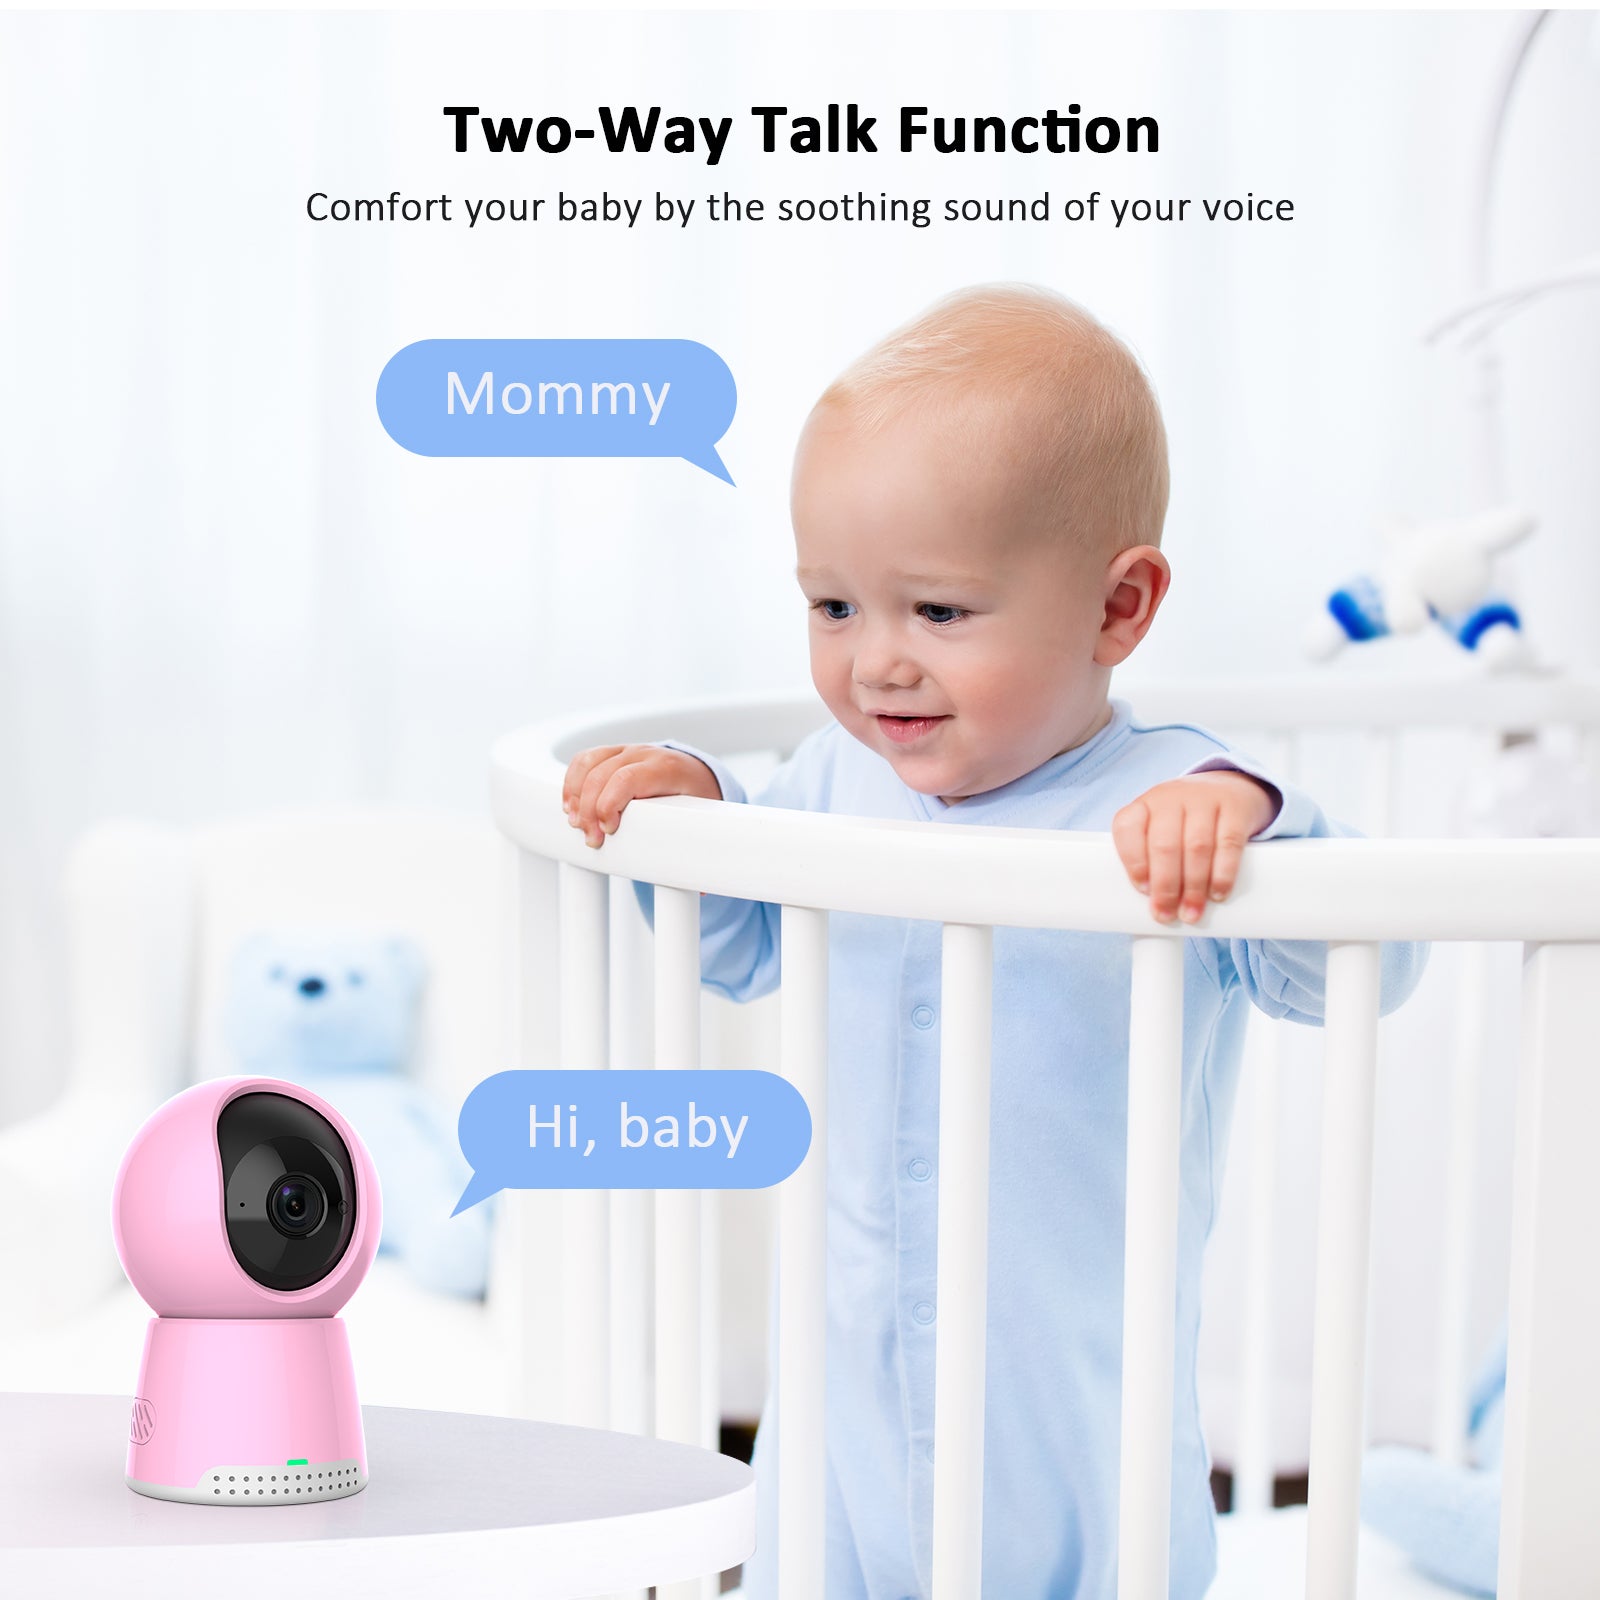 Mom can use the Two-Way Talk feature of the camera to communicate with the baby from a distance